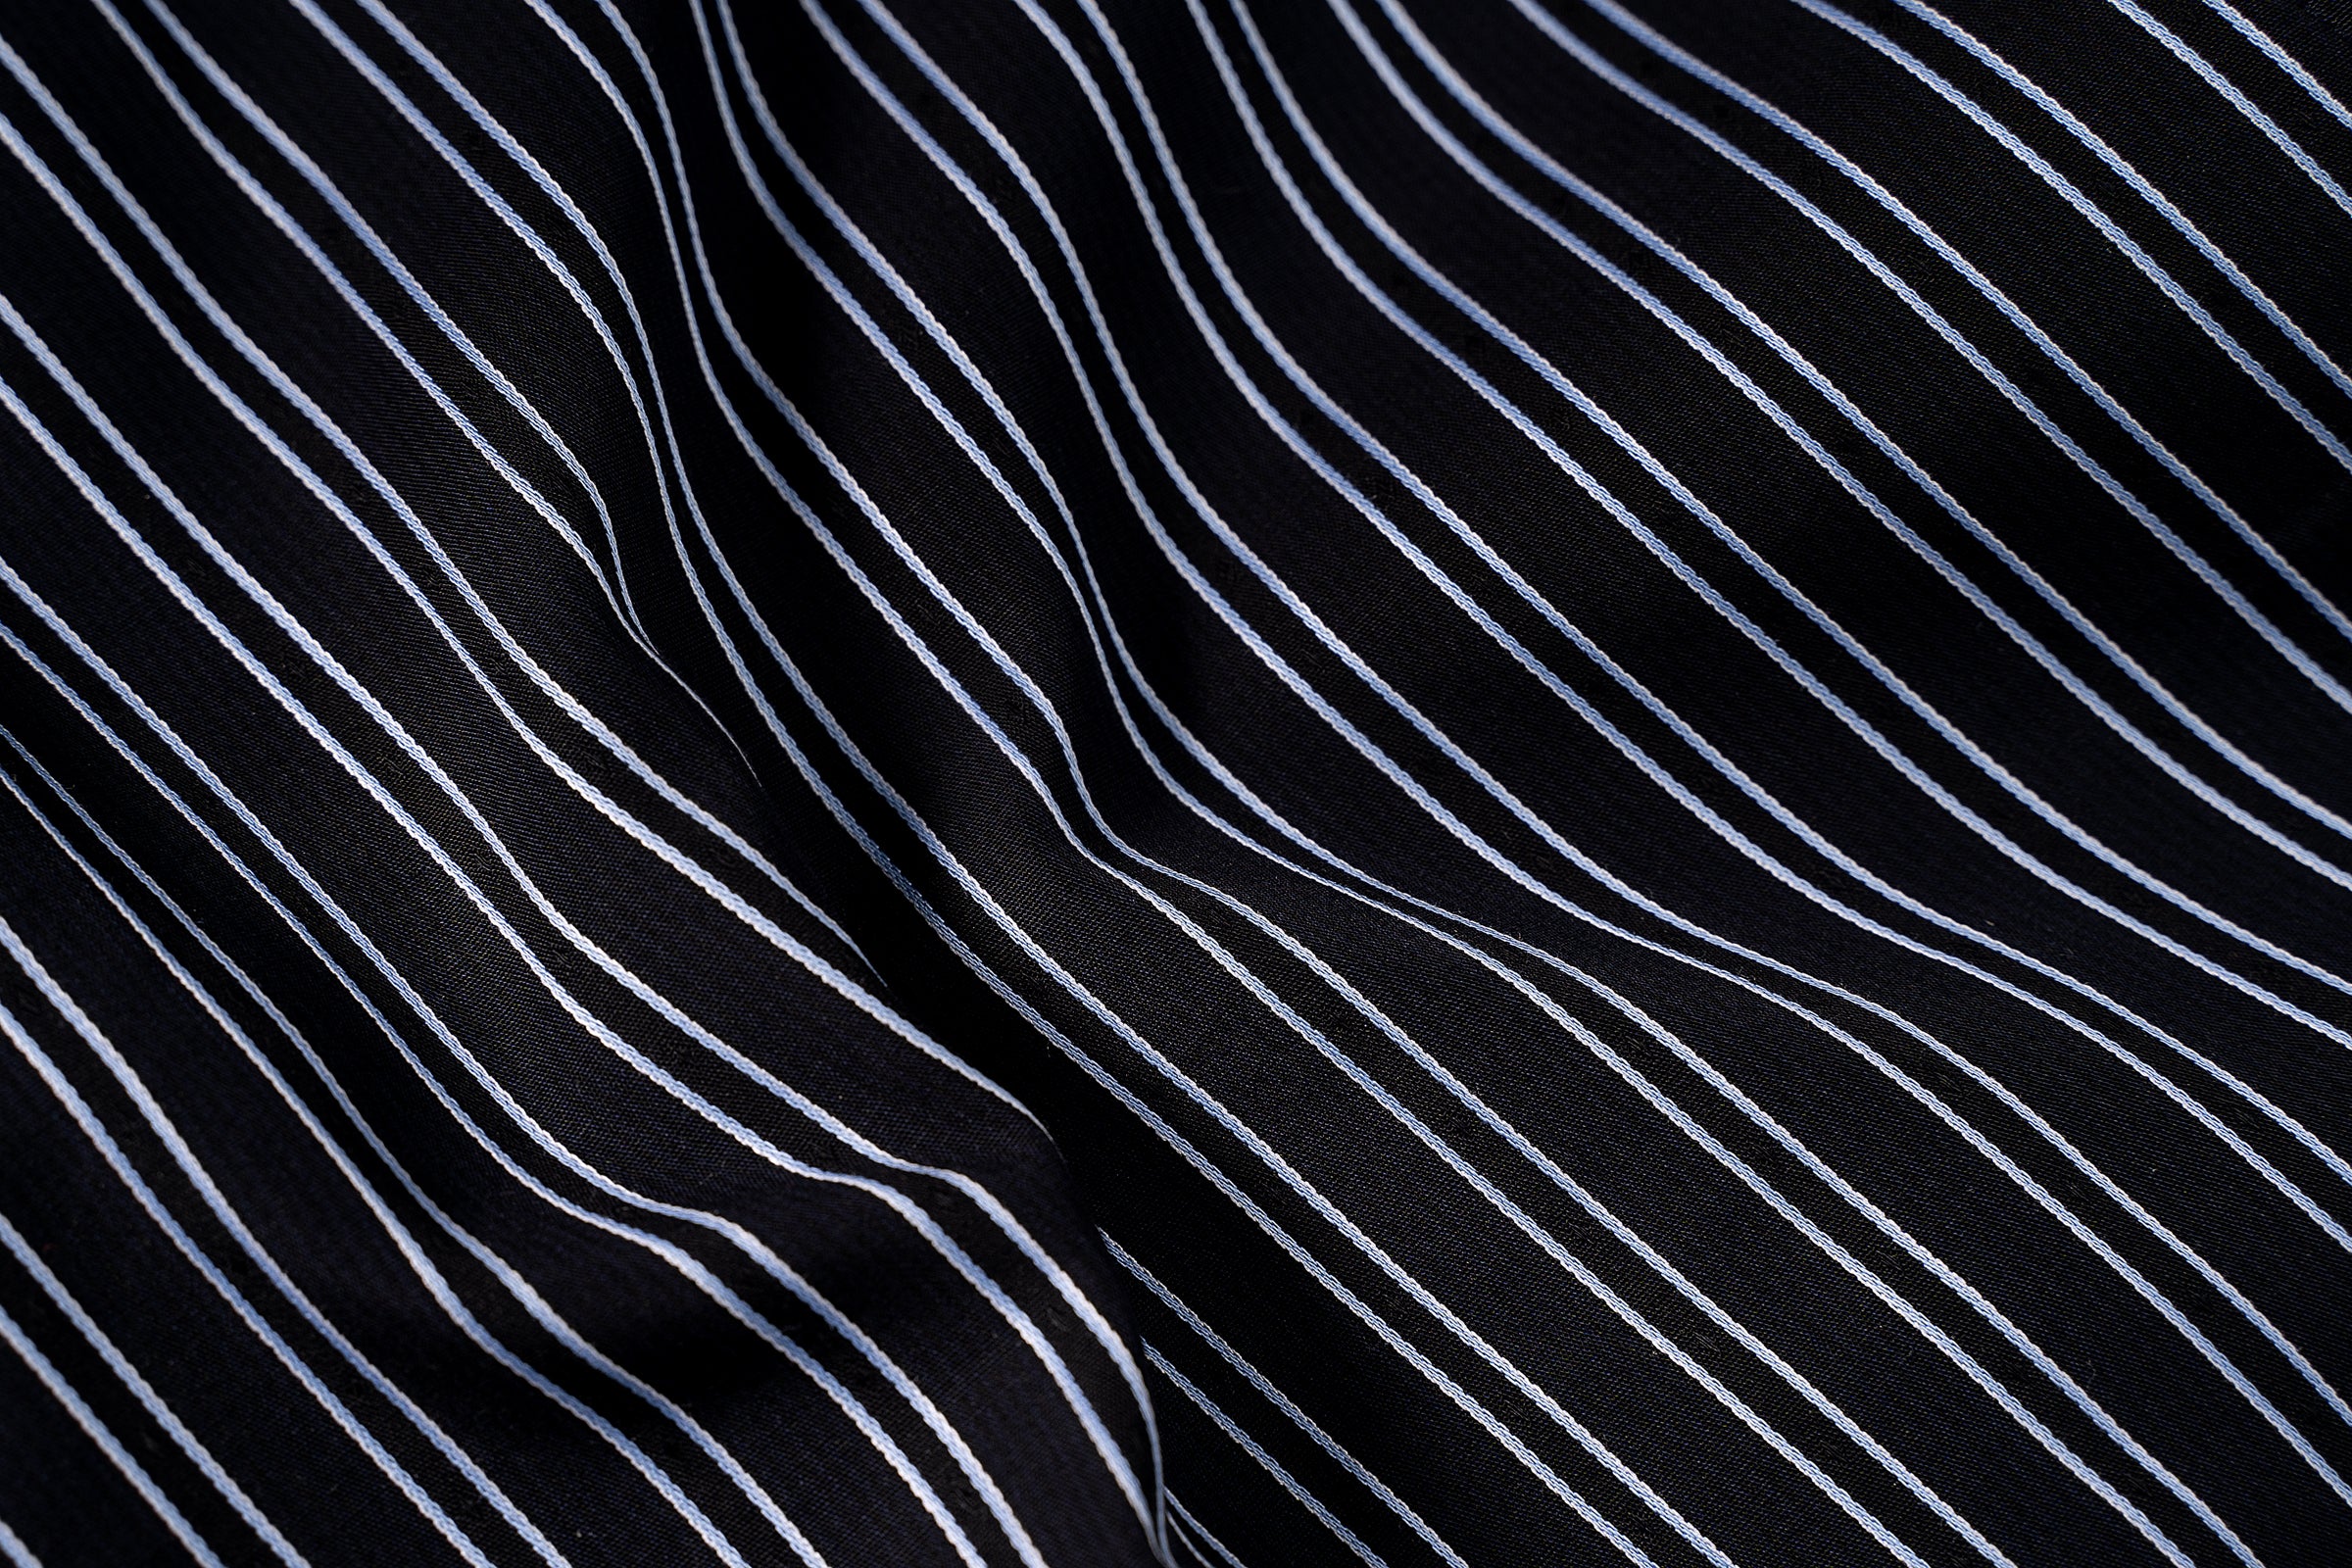 LIMITED EDITION SHIRT BLACK STRIPES - Charcoal Clothing